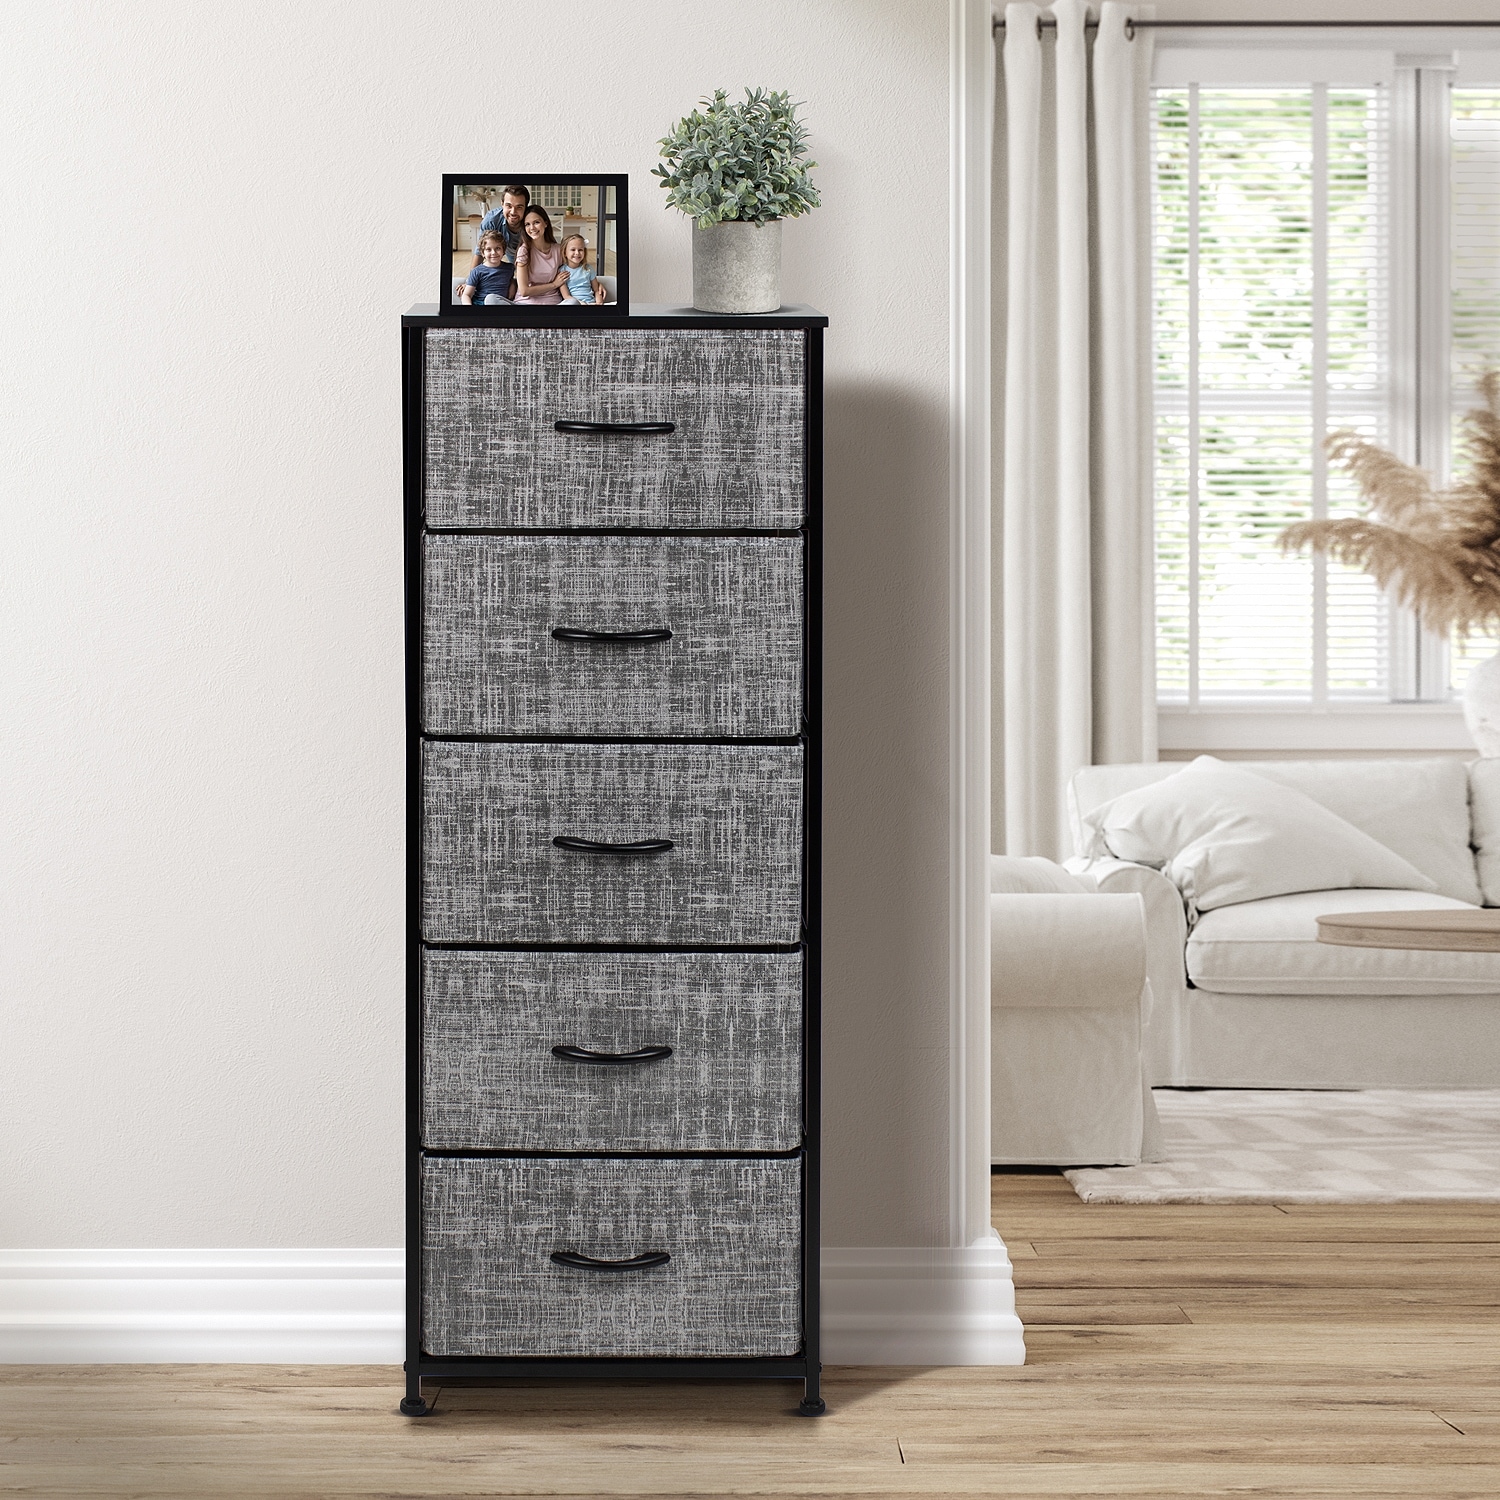 https://ak1.ostkcdn.com/images/products/is/images/direct/0e6f28968e5f1ab297813700de82ab0cff2bed1c/Dresser-w--5-Drawers-Furniture-Tall-Storage-Organizer-Unit-for-Bedroom.jpg